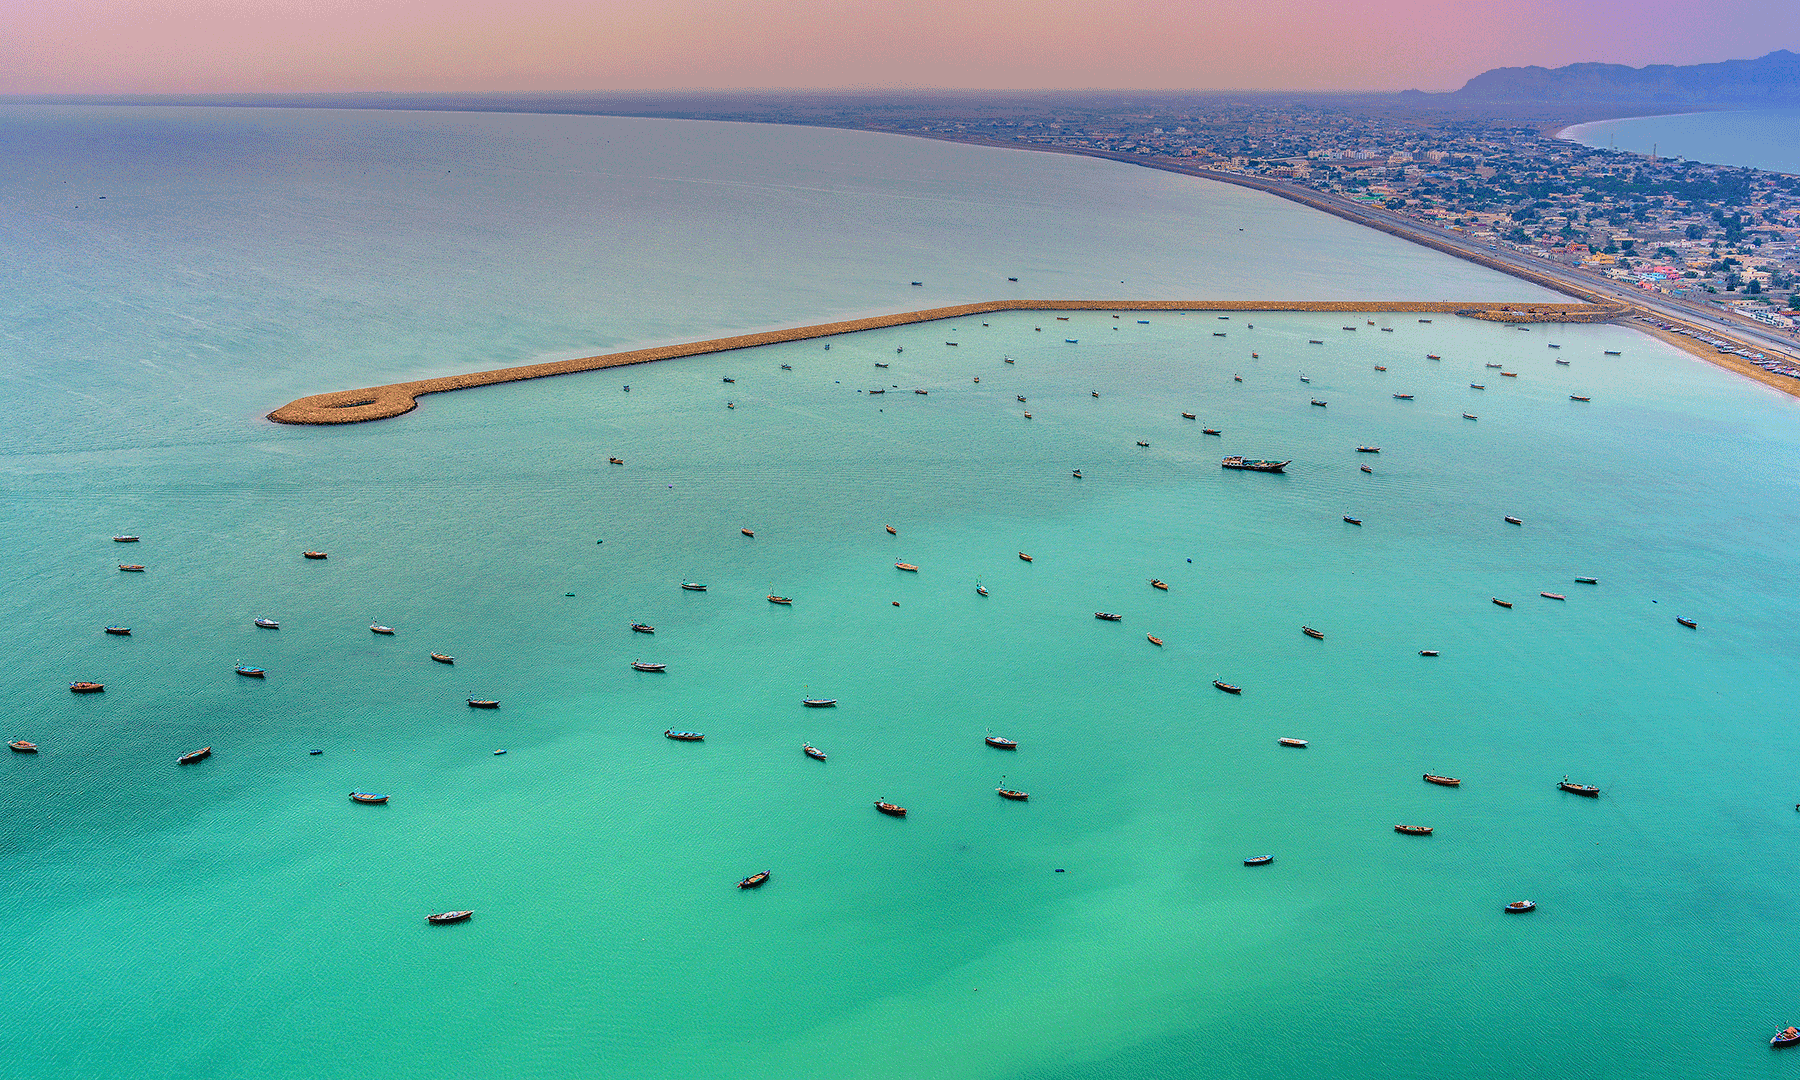 The coastline of Gwadar District stretches out in an east-west direction and it is almost entirely desert.